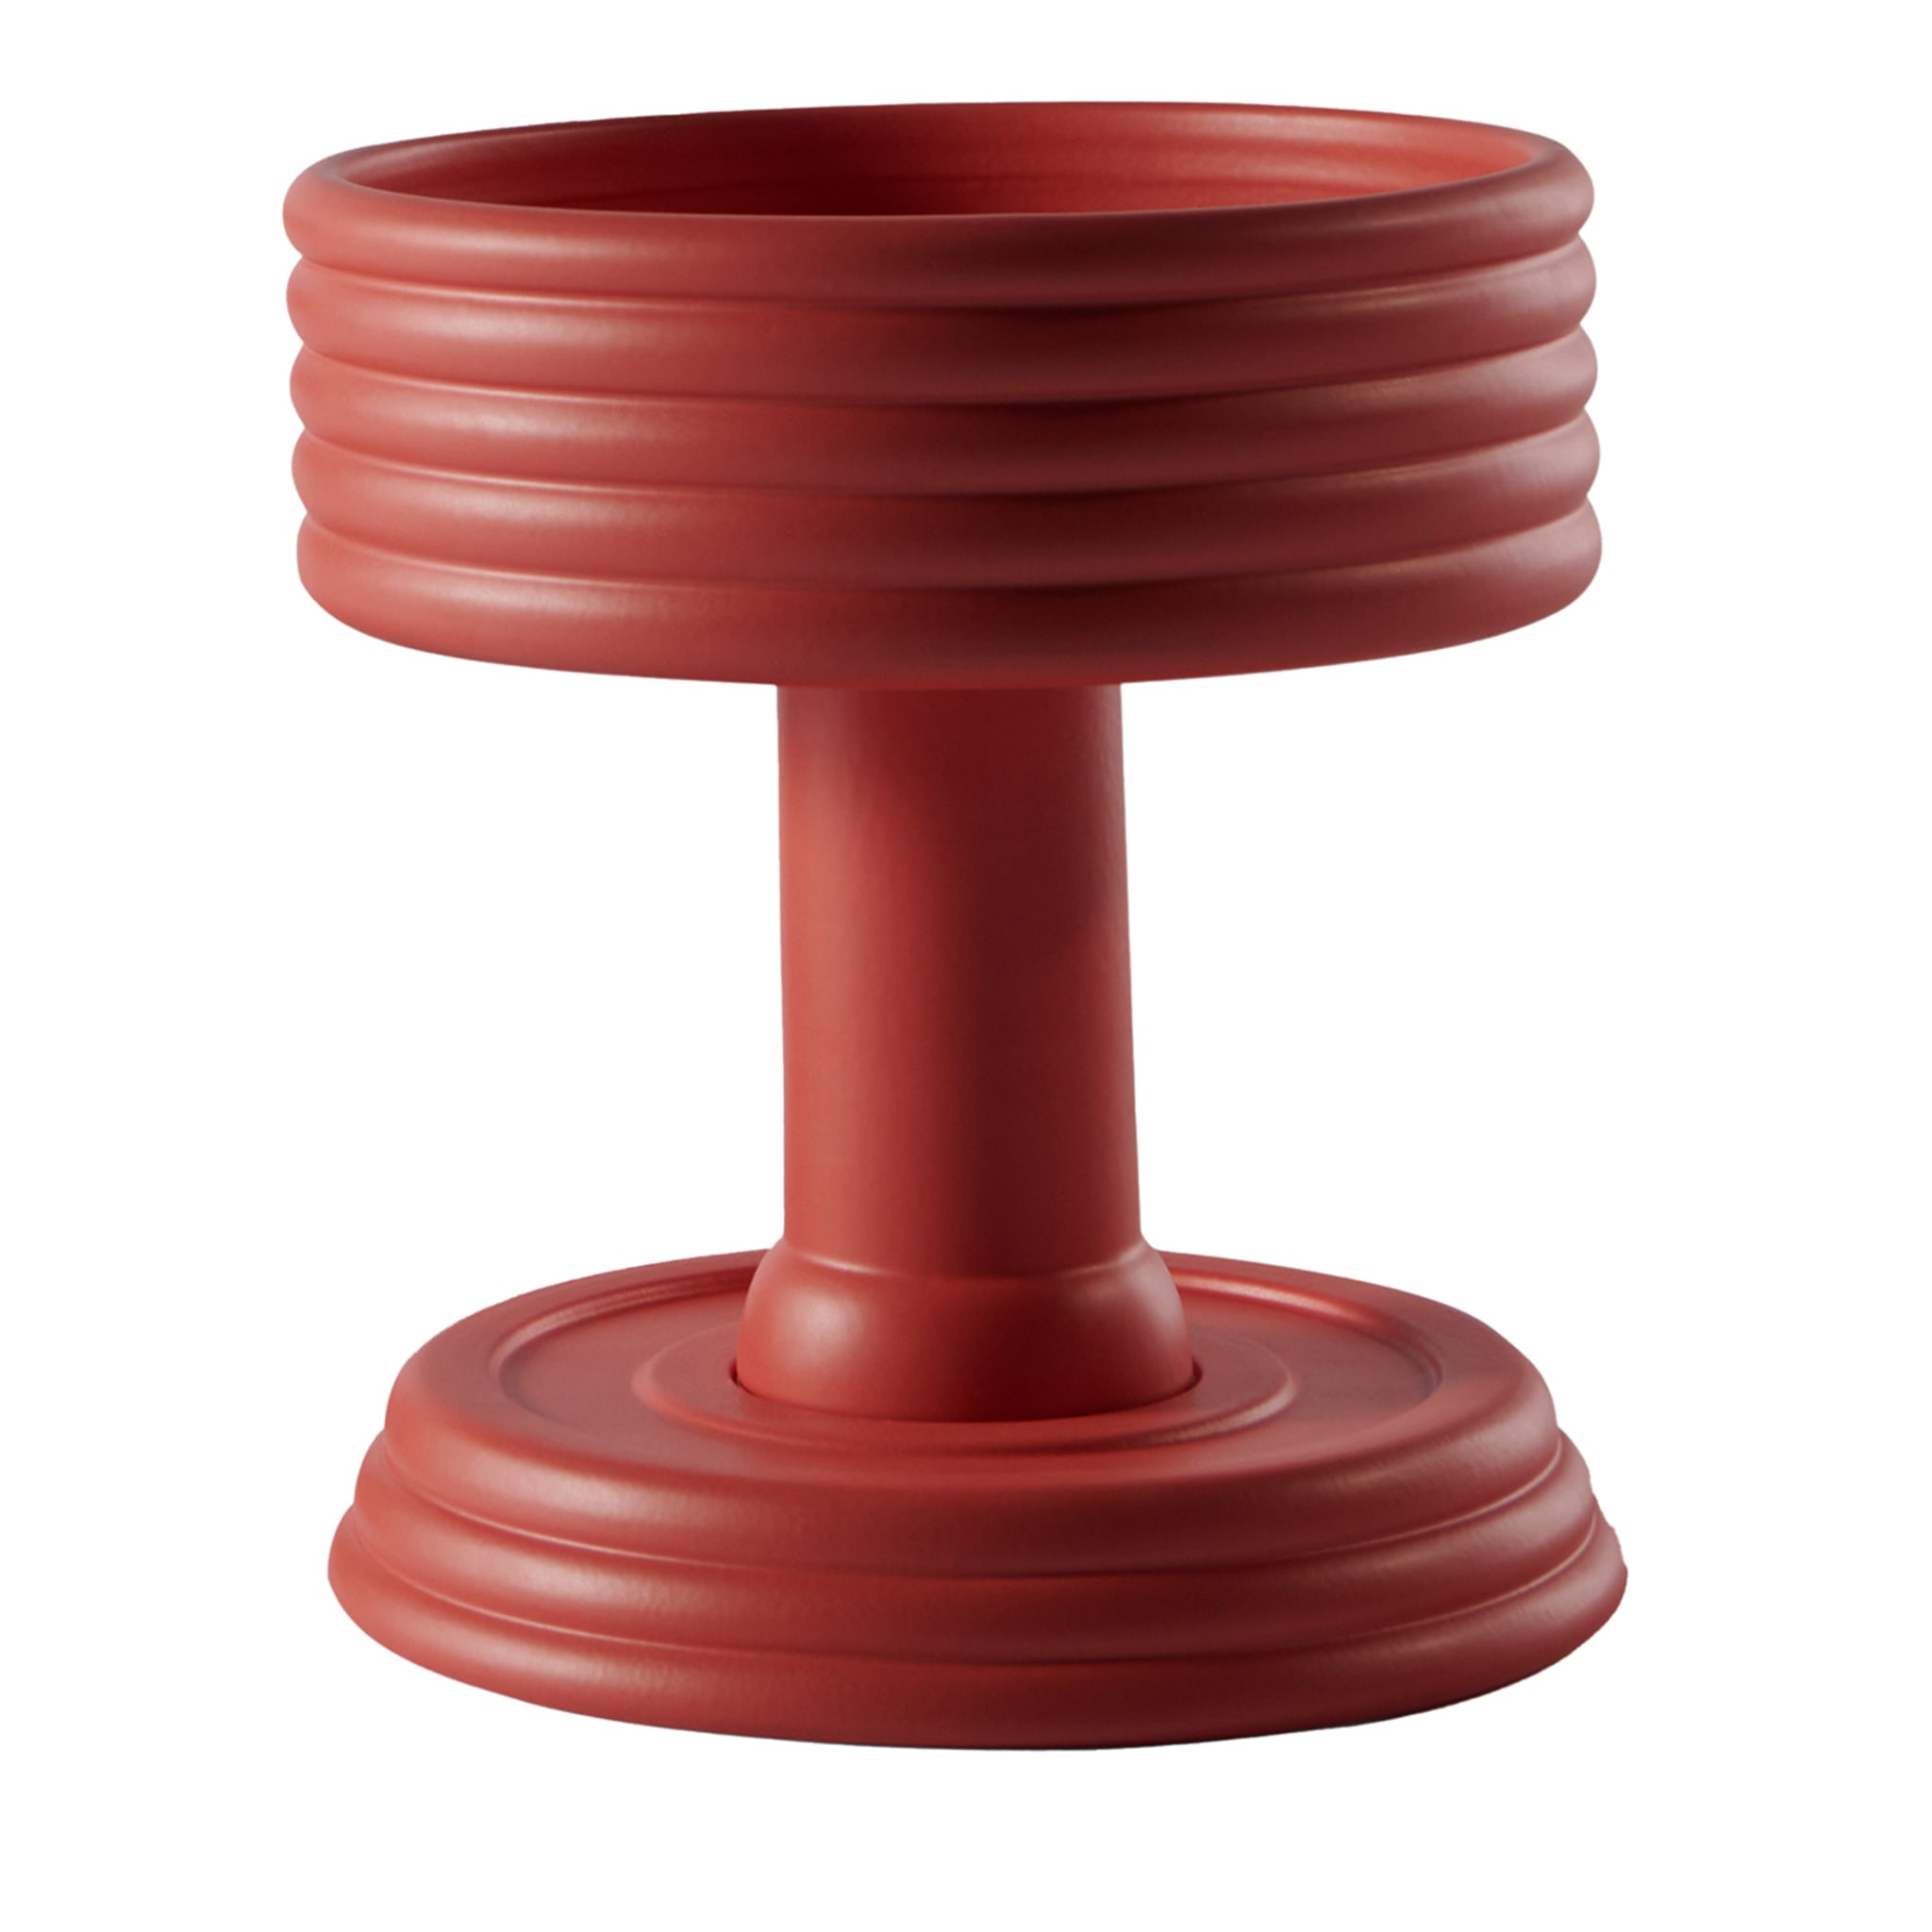 Triplex A Red Ceramic Centerpiece Limited Edition by Andrea Branciforti - Main view